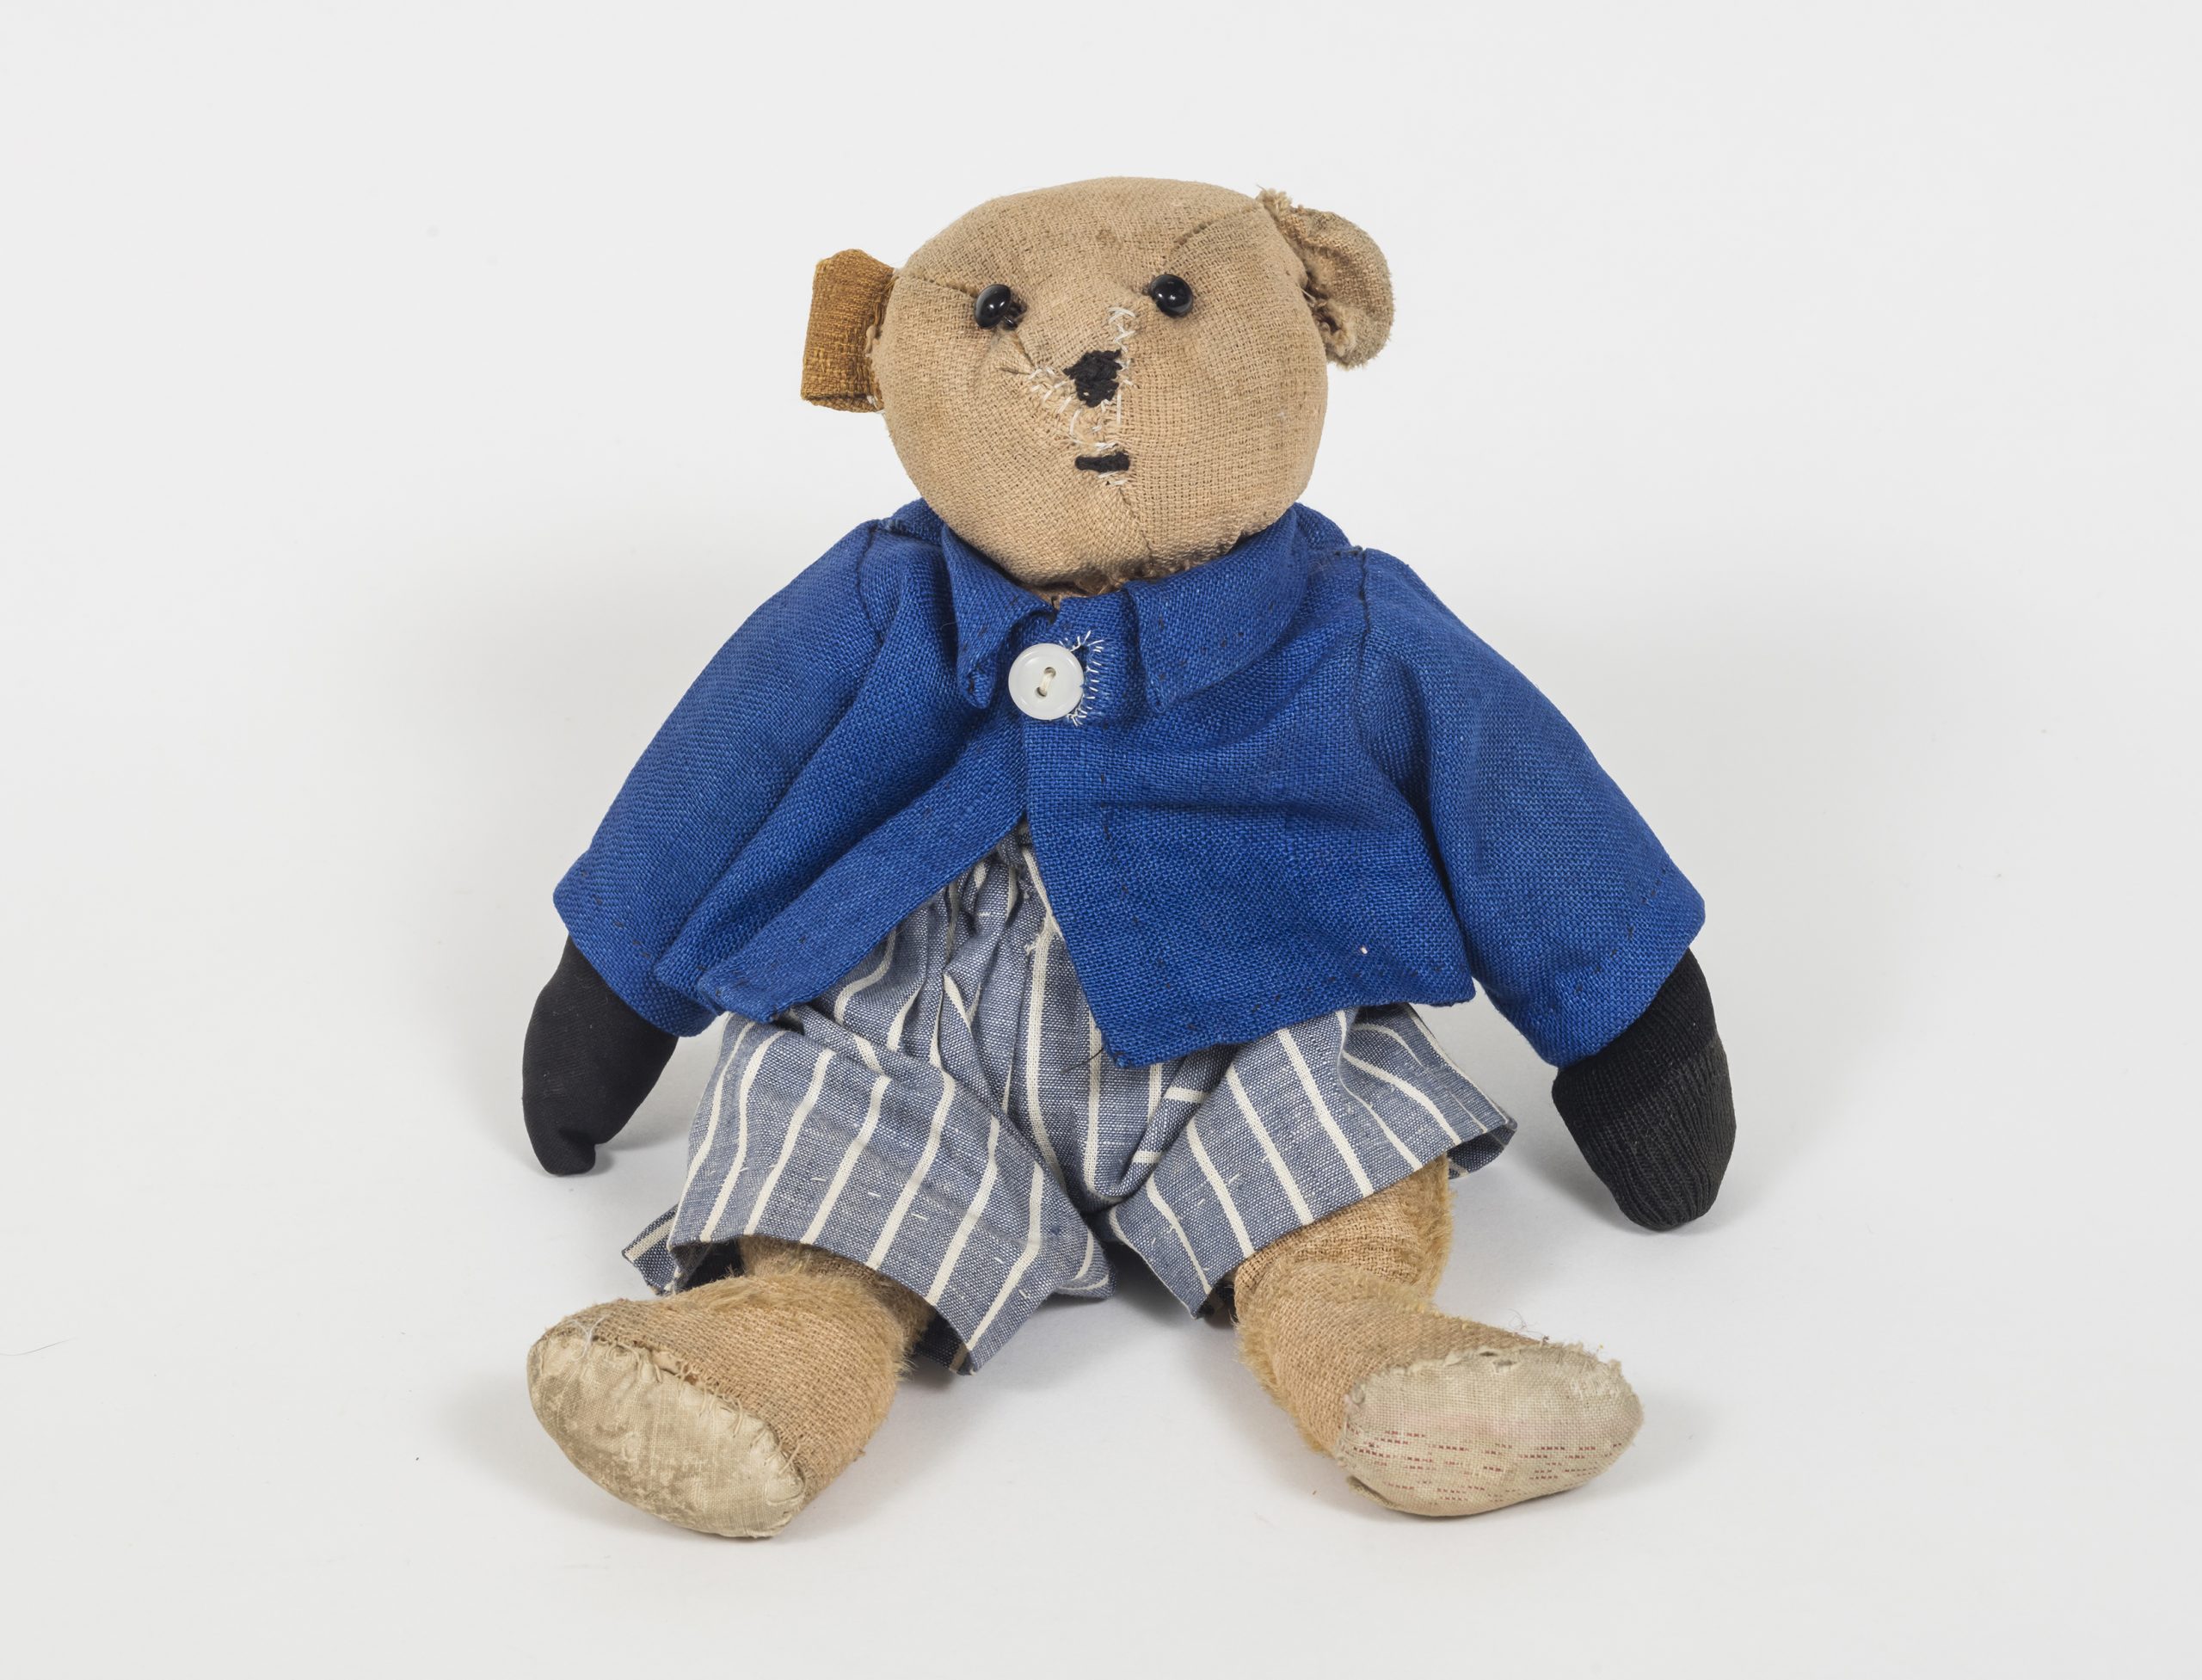 Teddy bear wearing a blue jacket, black mittens and blue and white striped pants